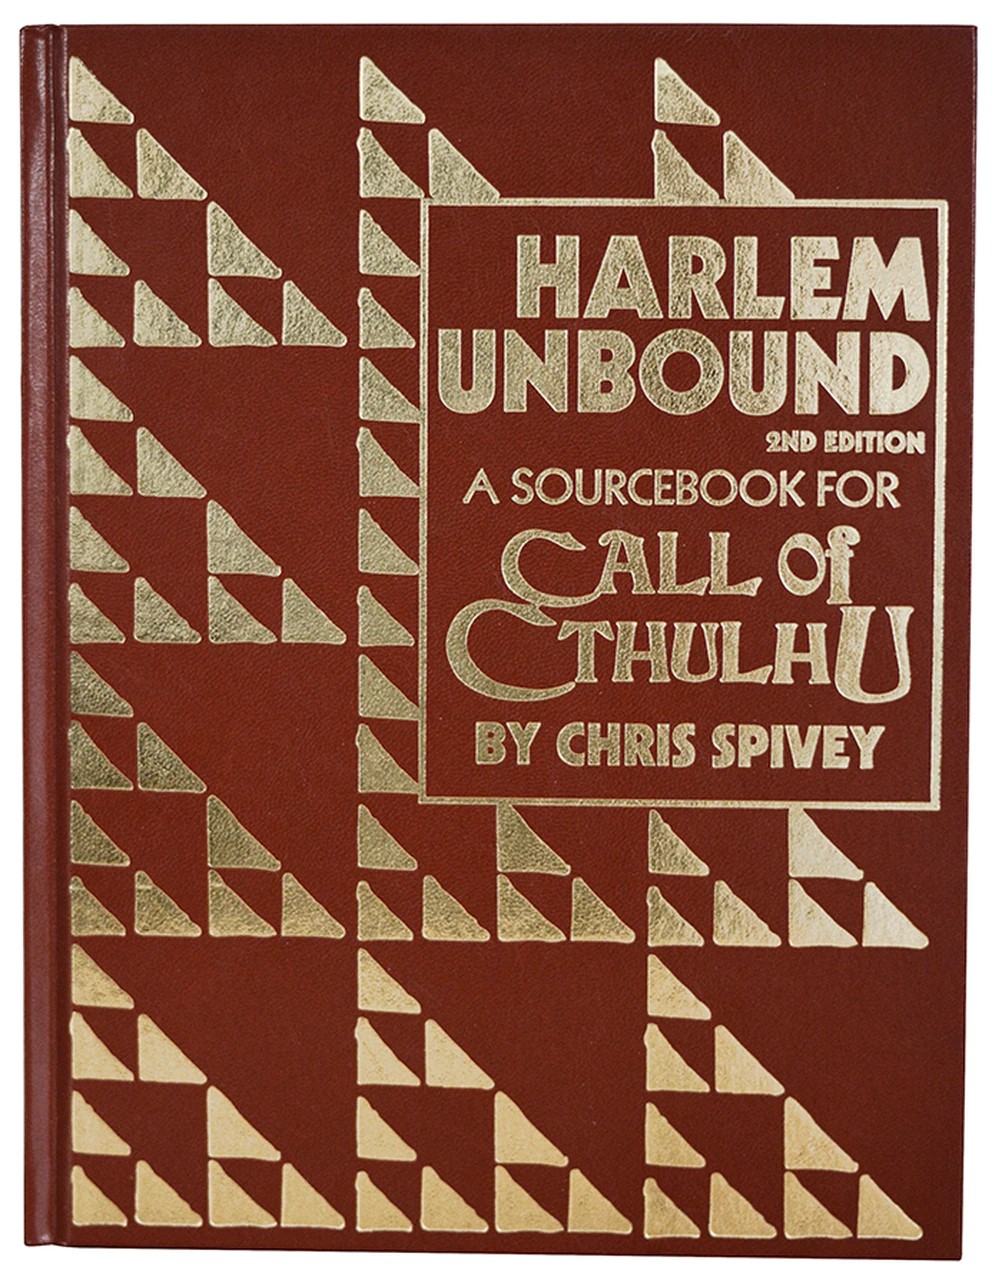 Call of Cthulhu: Harlem Unbound Supplement: 2nd Edition Leatherette - Used